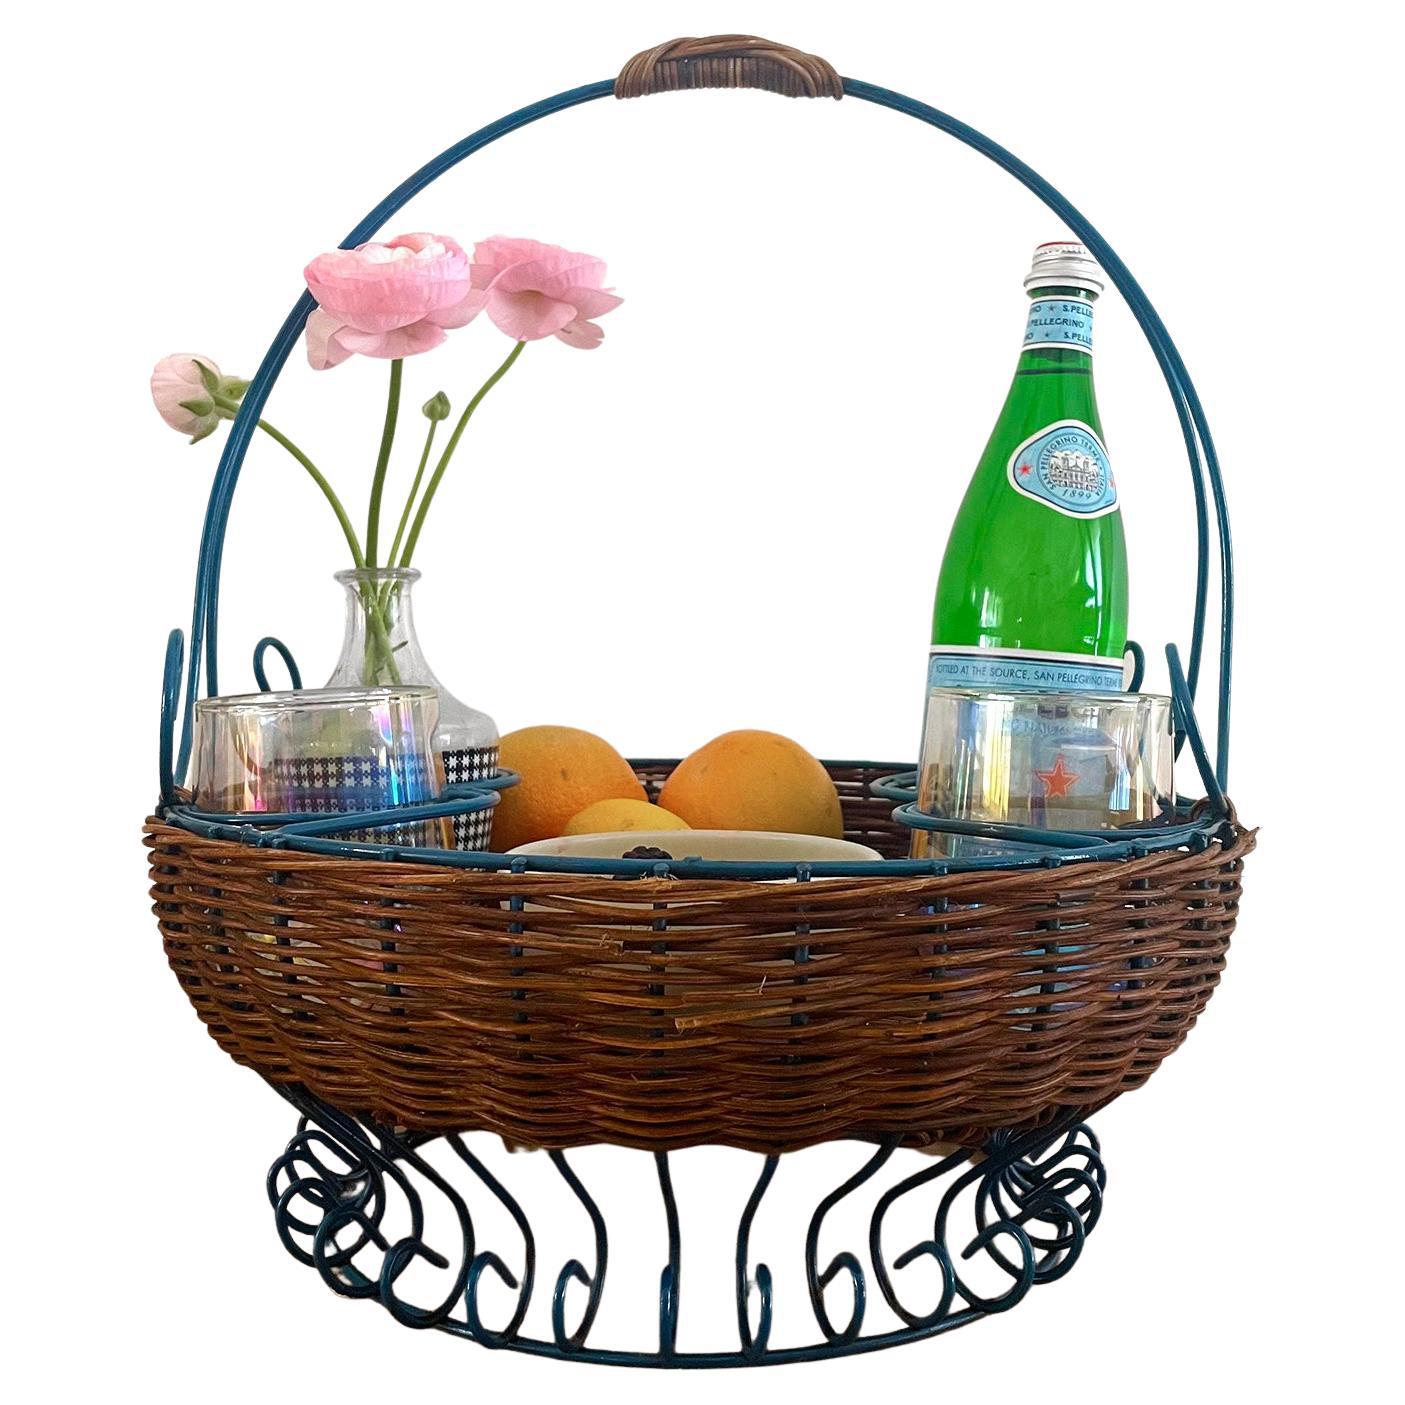 https://a.1stdibscdn.com/french-wicker-iron-picnic-service-basket-for-sale/f_63112/f_337774321681328191133/f_33777432_1681328191642_bg_processed.jpg